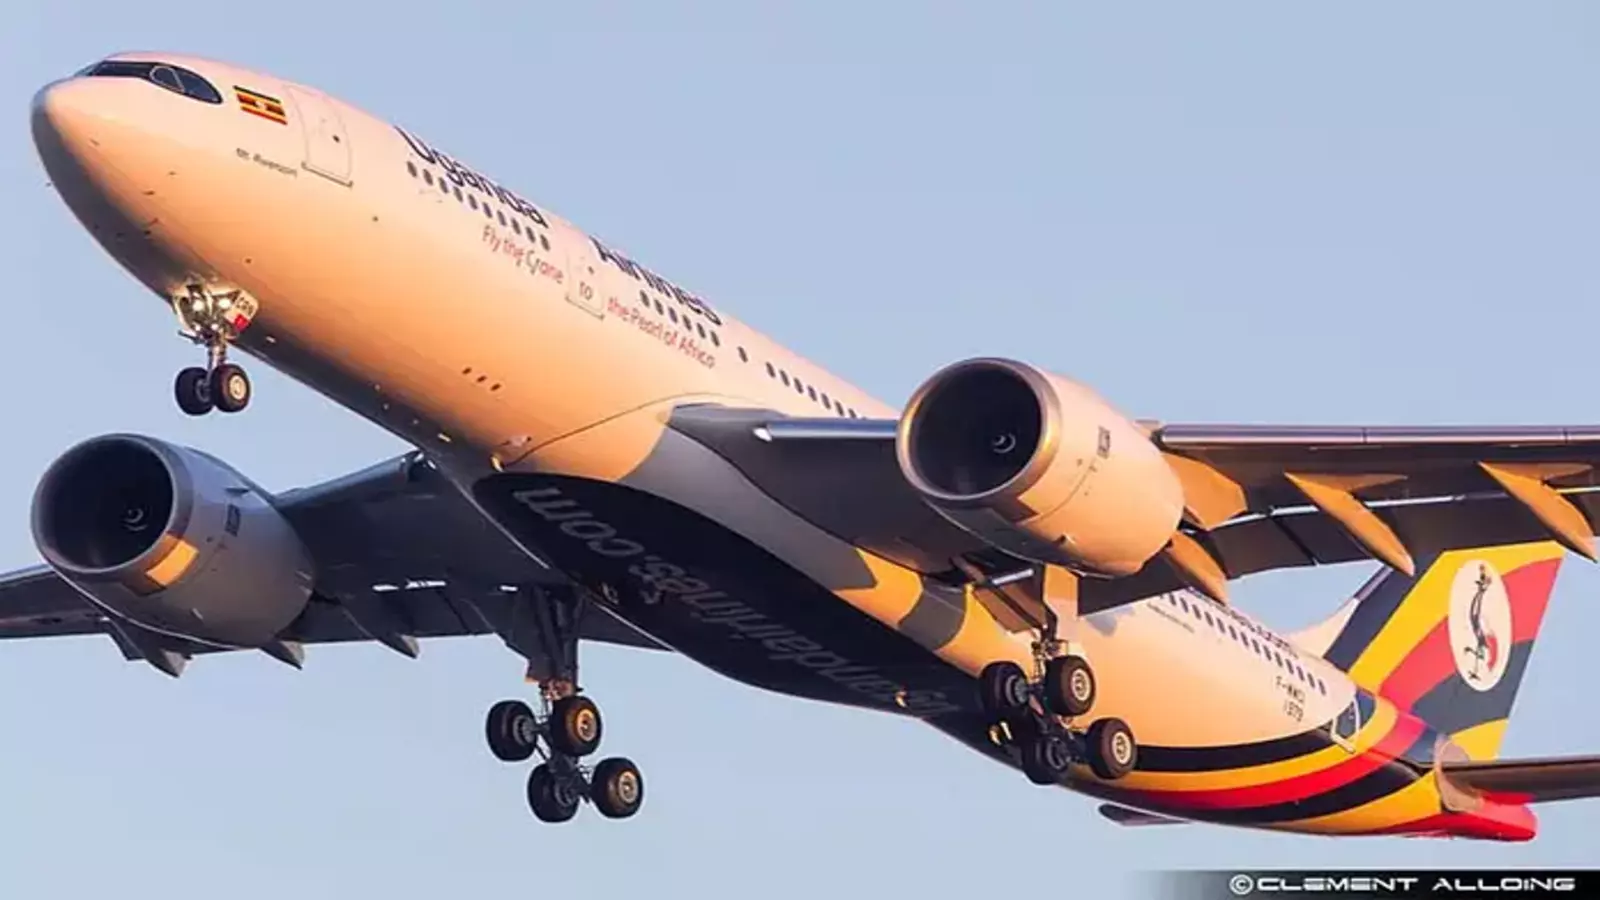 With Shs350bn, Uganda Airlines plans to fly local suppliers to global skies